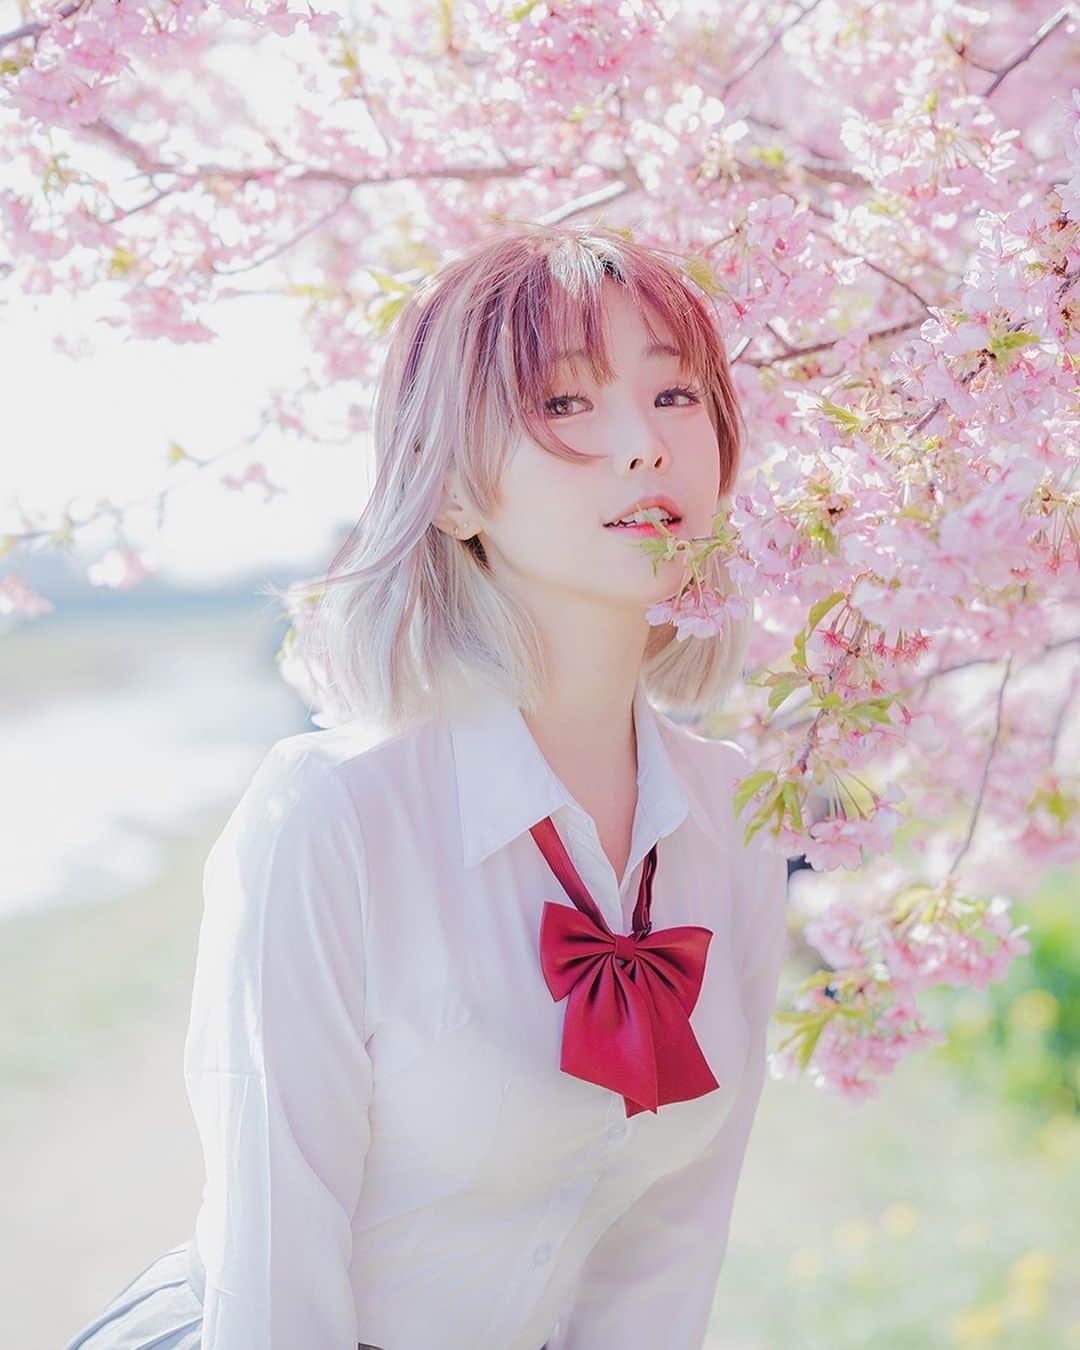 Elyのインスタグラム：「Hello everyone, it's March ! It's the season when everything is in full bloom, and I hope you can all enjoy this beautiful time of year. In this month, let me take you to appreciate the early-blooming cherry blossoms together.🌸🌸🌸  ✧～✧～✧ もう3月になりましたね！ 花が咲き誇る春の季節です。この美しい季節を存分に楽しめるといいですね。 今月の写真セットはこちらです、早咲きの桜を一緒に楽しみましょう。🌸🌸🌸  ✧～✧～✧  一個眨眼，到三月了！✨ 漸漸越來越暖的天氣，希望你們都能好好地享受這美好的季節~ 在這個月份，讓Ely帶你一起欣賞早早來訪的櫻花🌸🌸🌸 ✦歡迎加入收藏完整寫真  #ely #elycosplay #portrait #sakura #制服 #uniform」